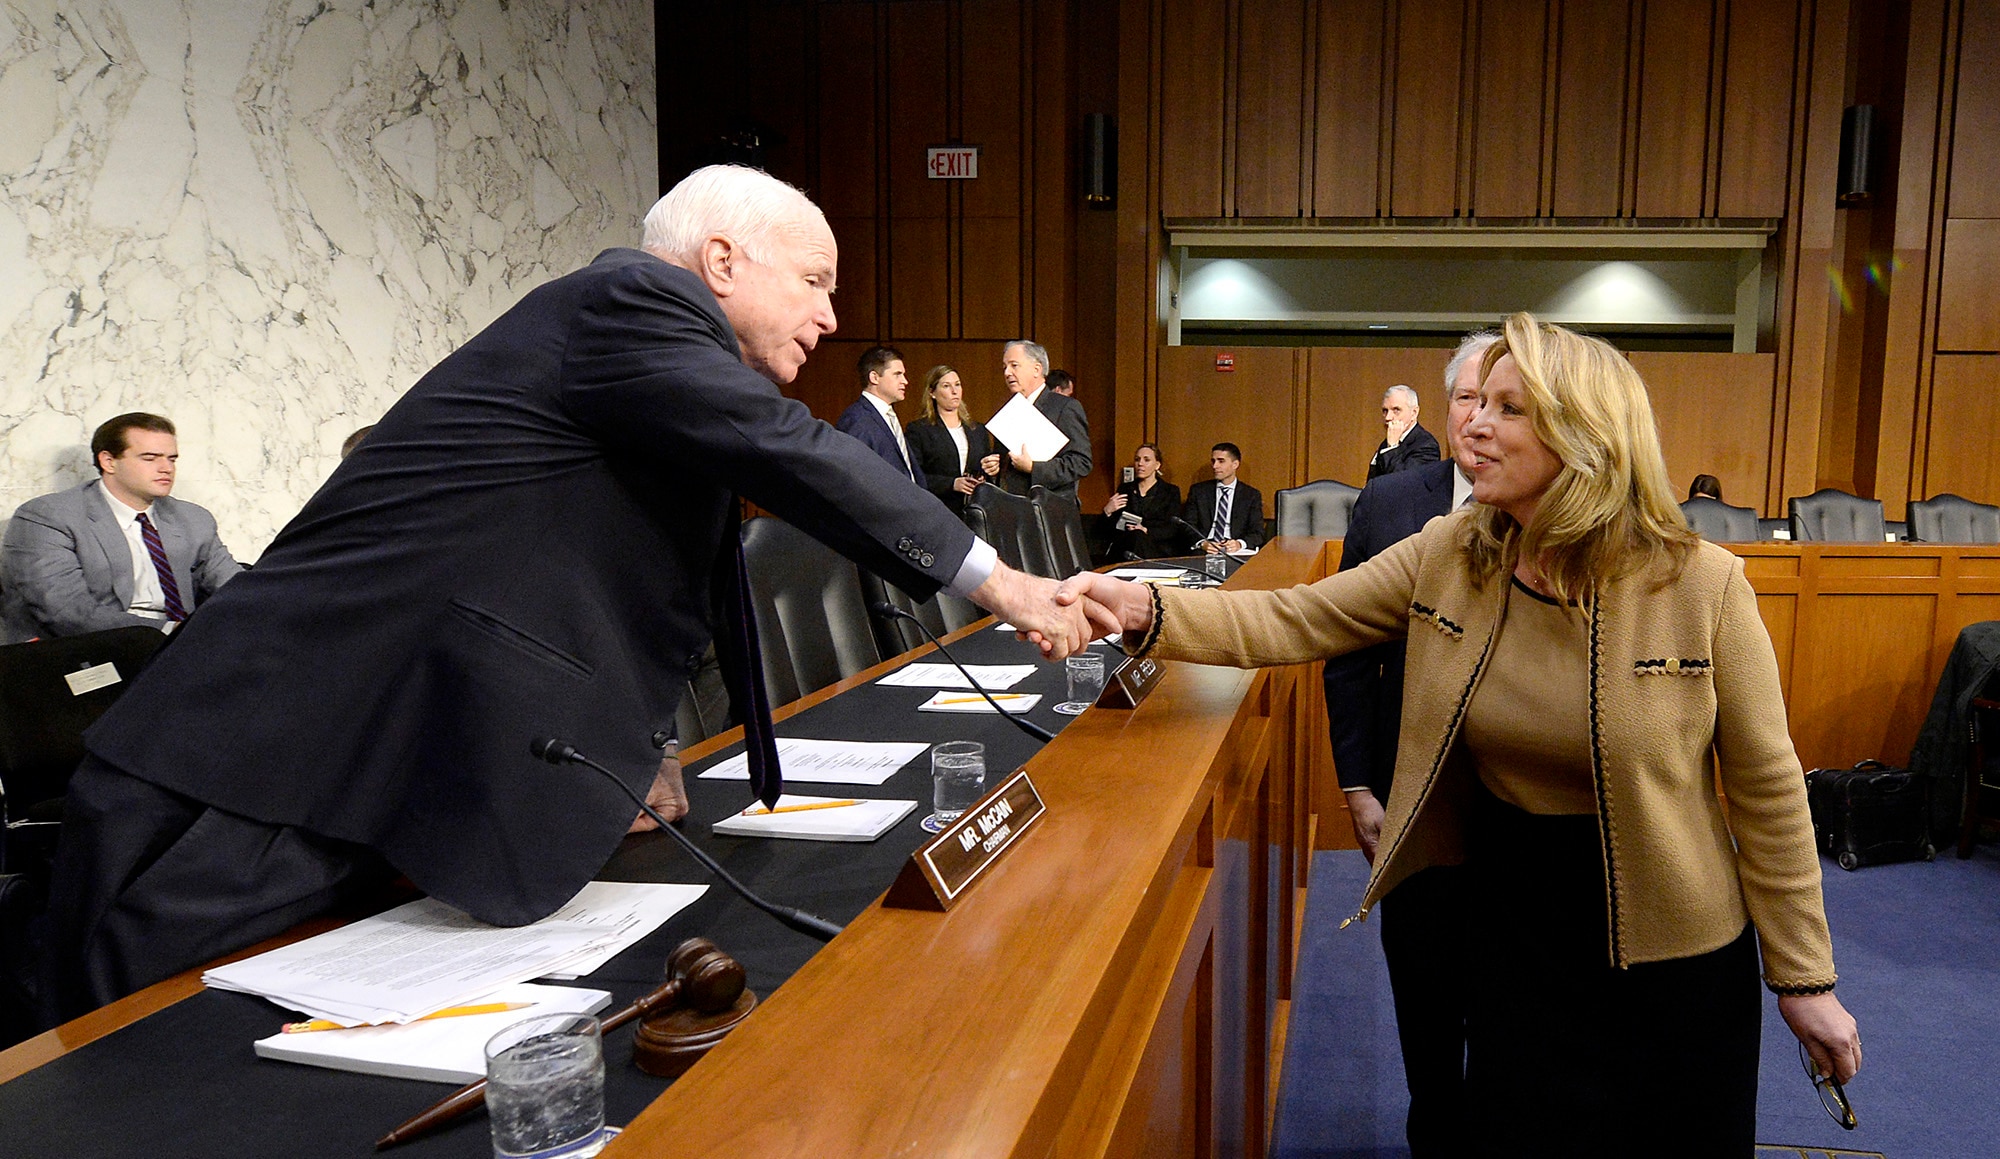 Secretary of the Air Force Deborah Lee James greets Sen. John McCain, R-Ariz., before a Senate Armed Services Committee hearing Jan. 27, 2016, in Washington, D.C. James testified with Frank Kendall, the undersecretary of defense for acquisition, technology and logistics. The witnesses provided insight on the military's space launch capabilities. (U.S. Air Force photo/Scott M. Ash)